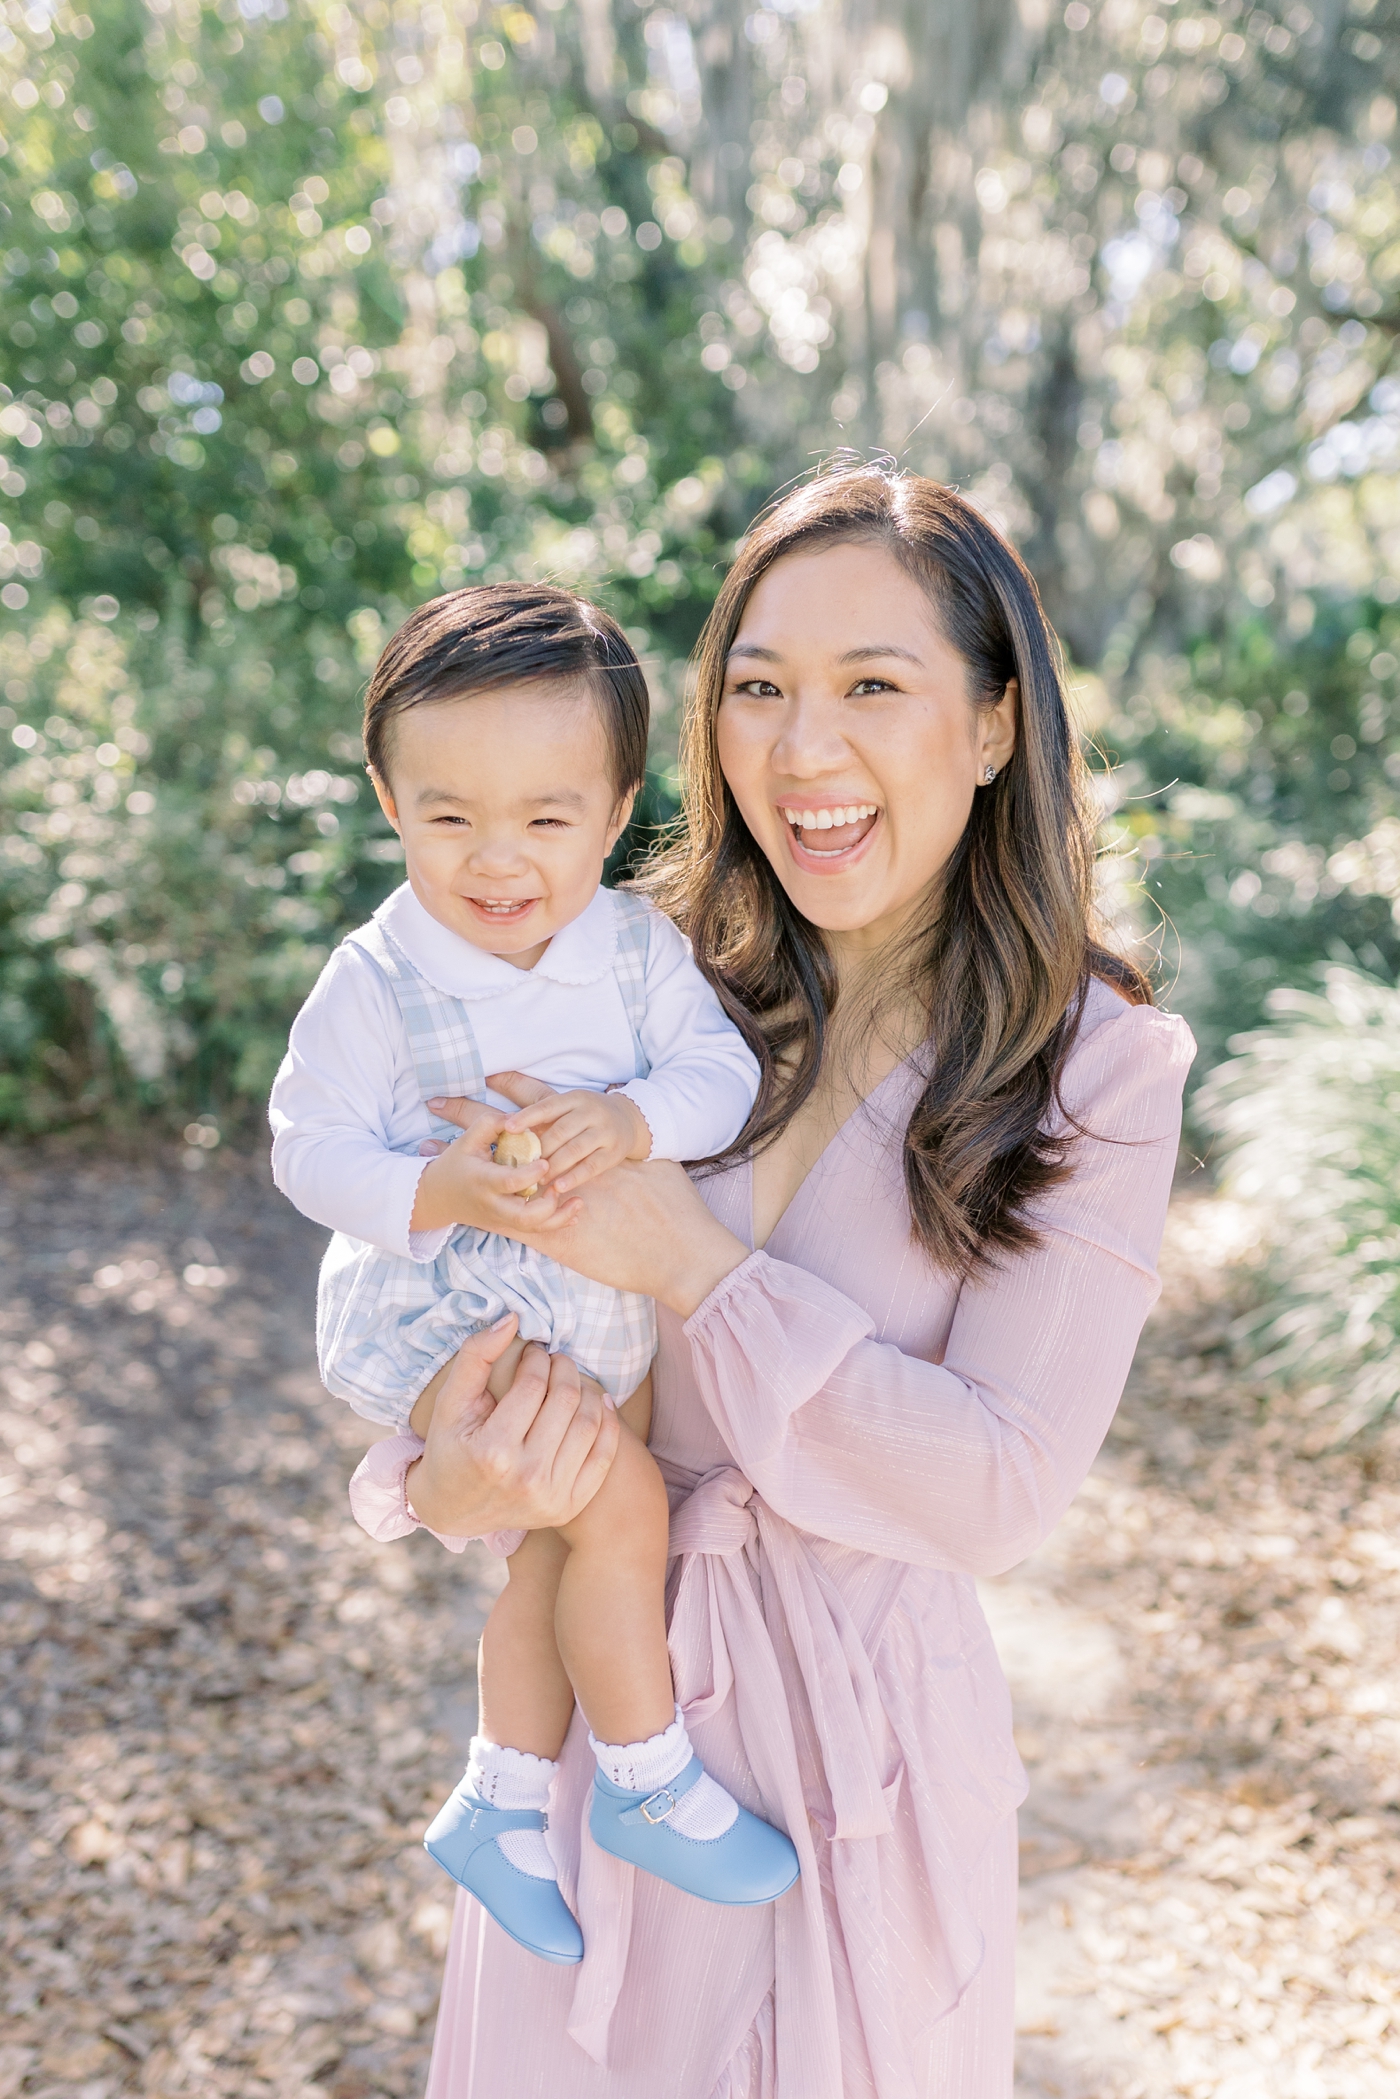 Baby boy and mom in pink dress smile for the camera in Hampton park | Photo by Caitlyn Motycka Photography